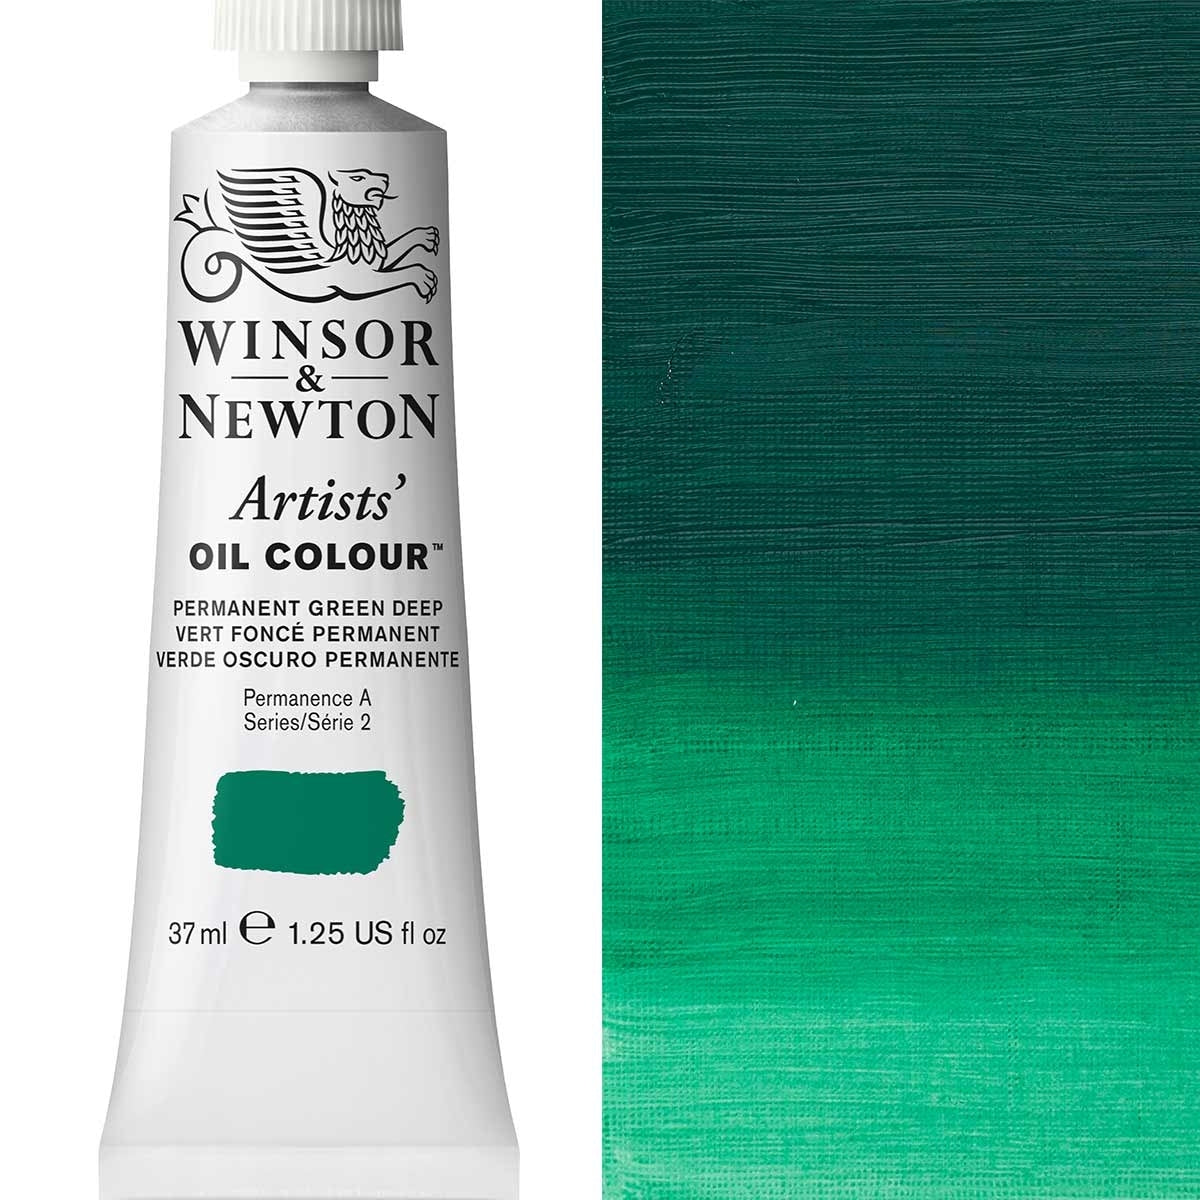 Winsor and Newton - Artists' Oil Colour - 37ml - Permanent Green Deep